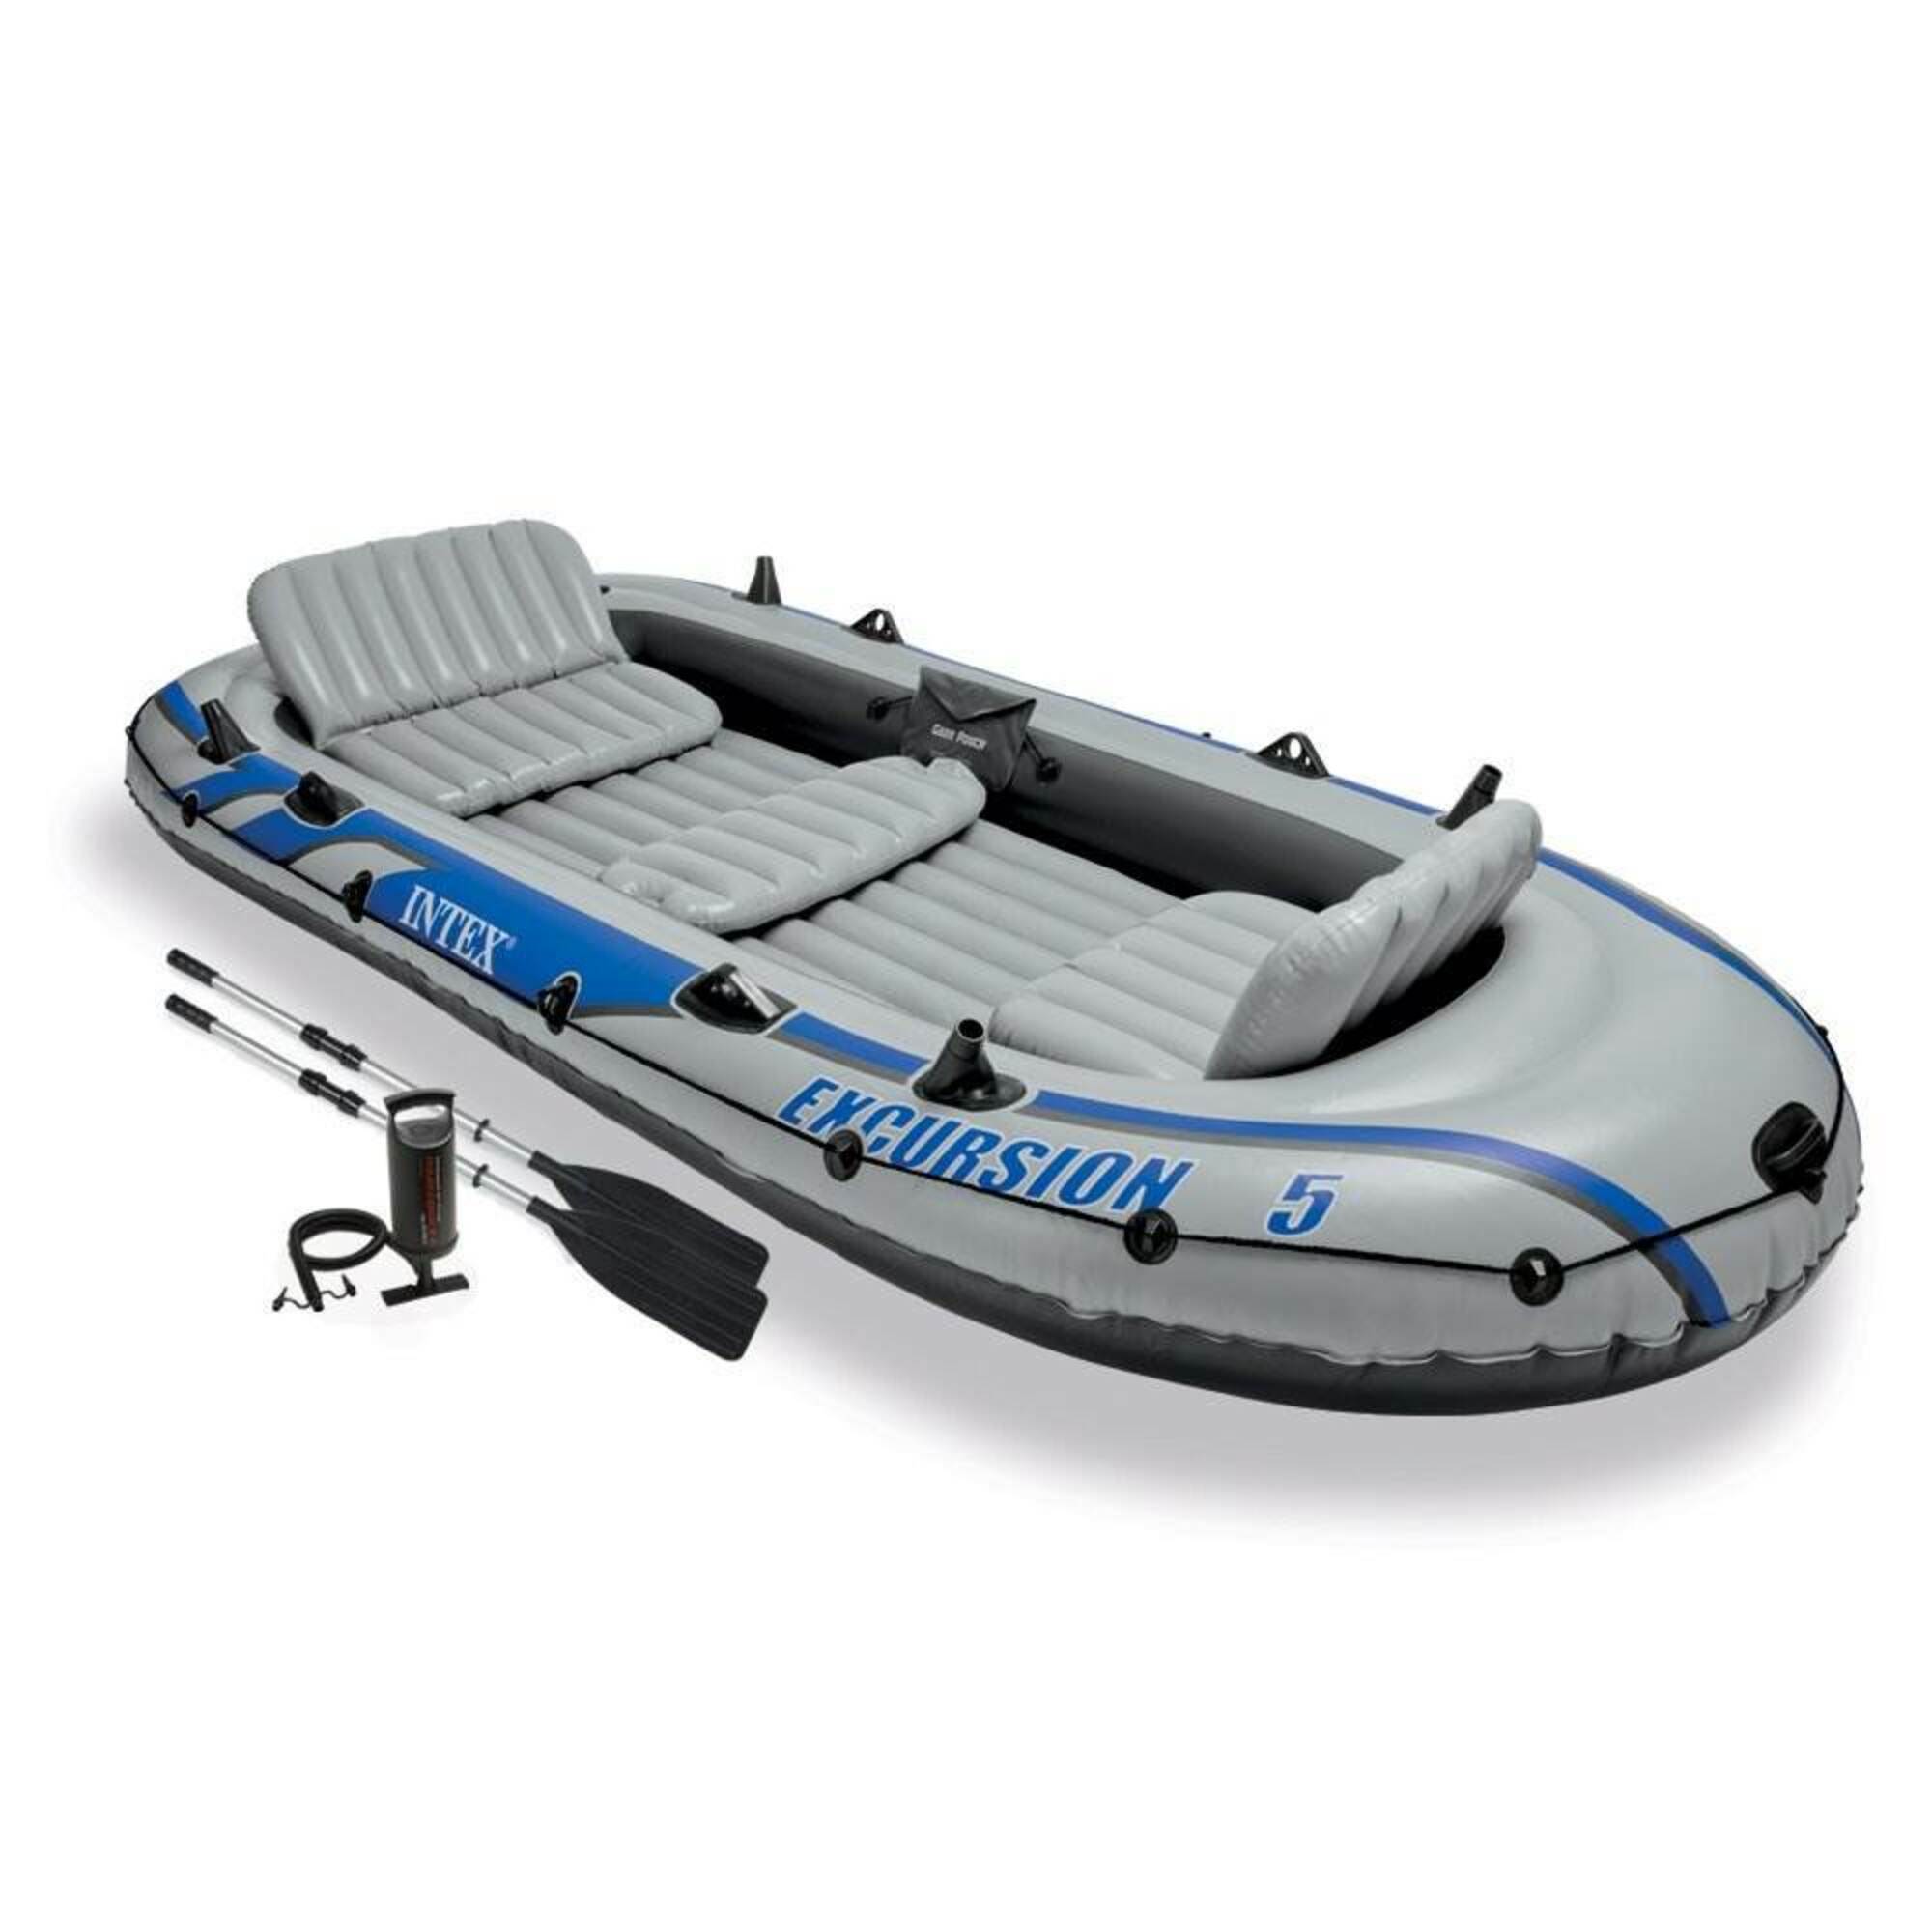 Lnflatable Boat 4 Person Inflatable Boat Fishing PVC Canoe Dinghy with Air  Mat Bottom Outdoor Sport Fishing Drifting Surfing Comfortable